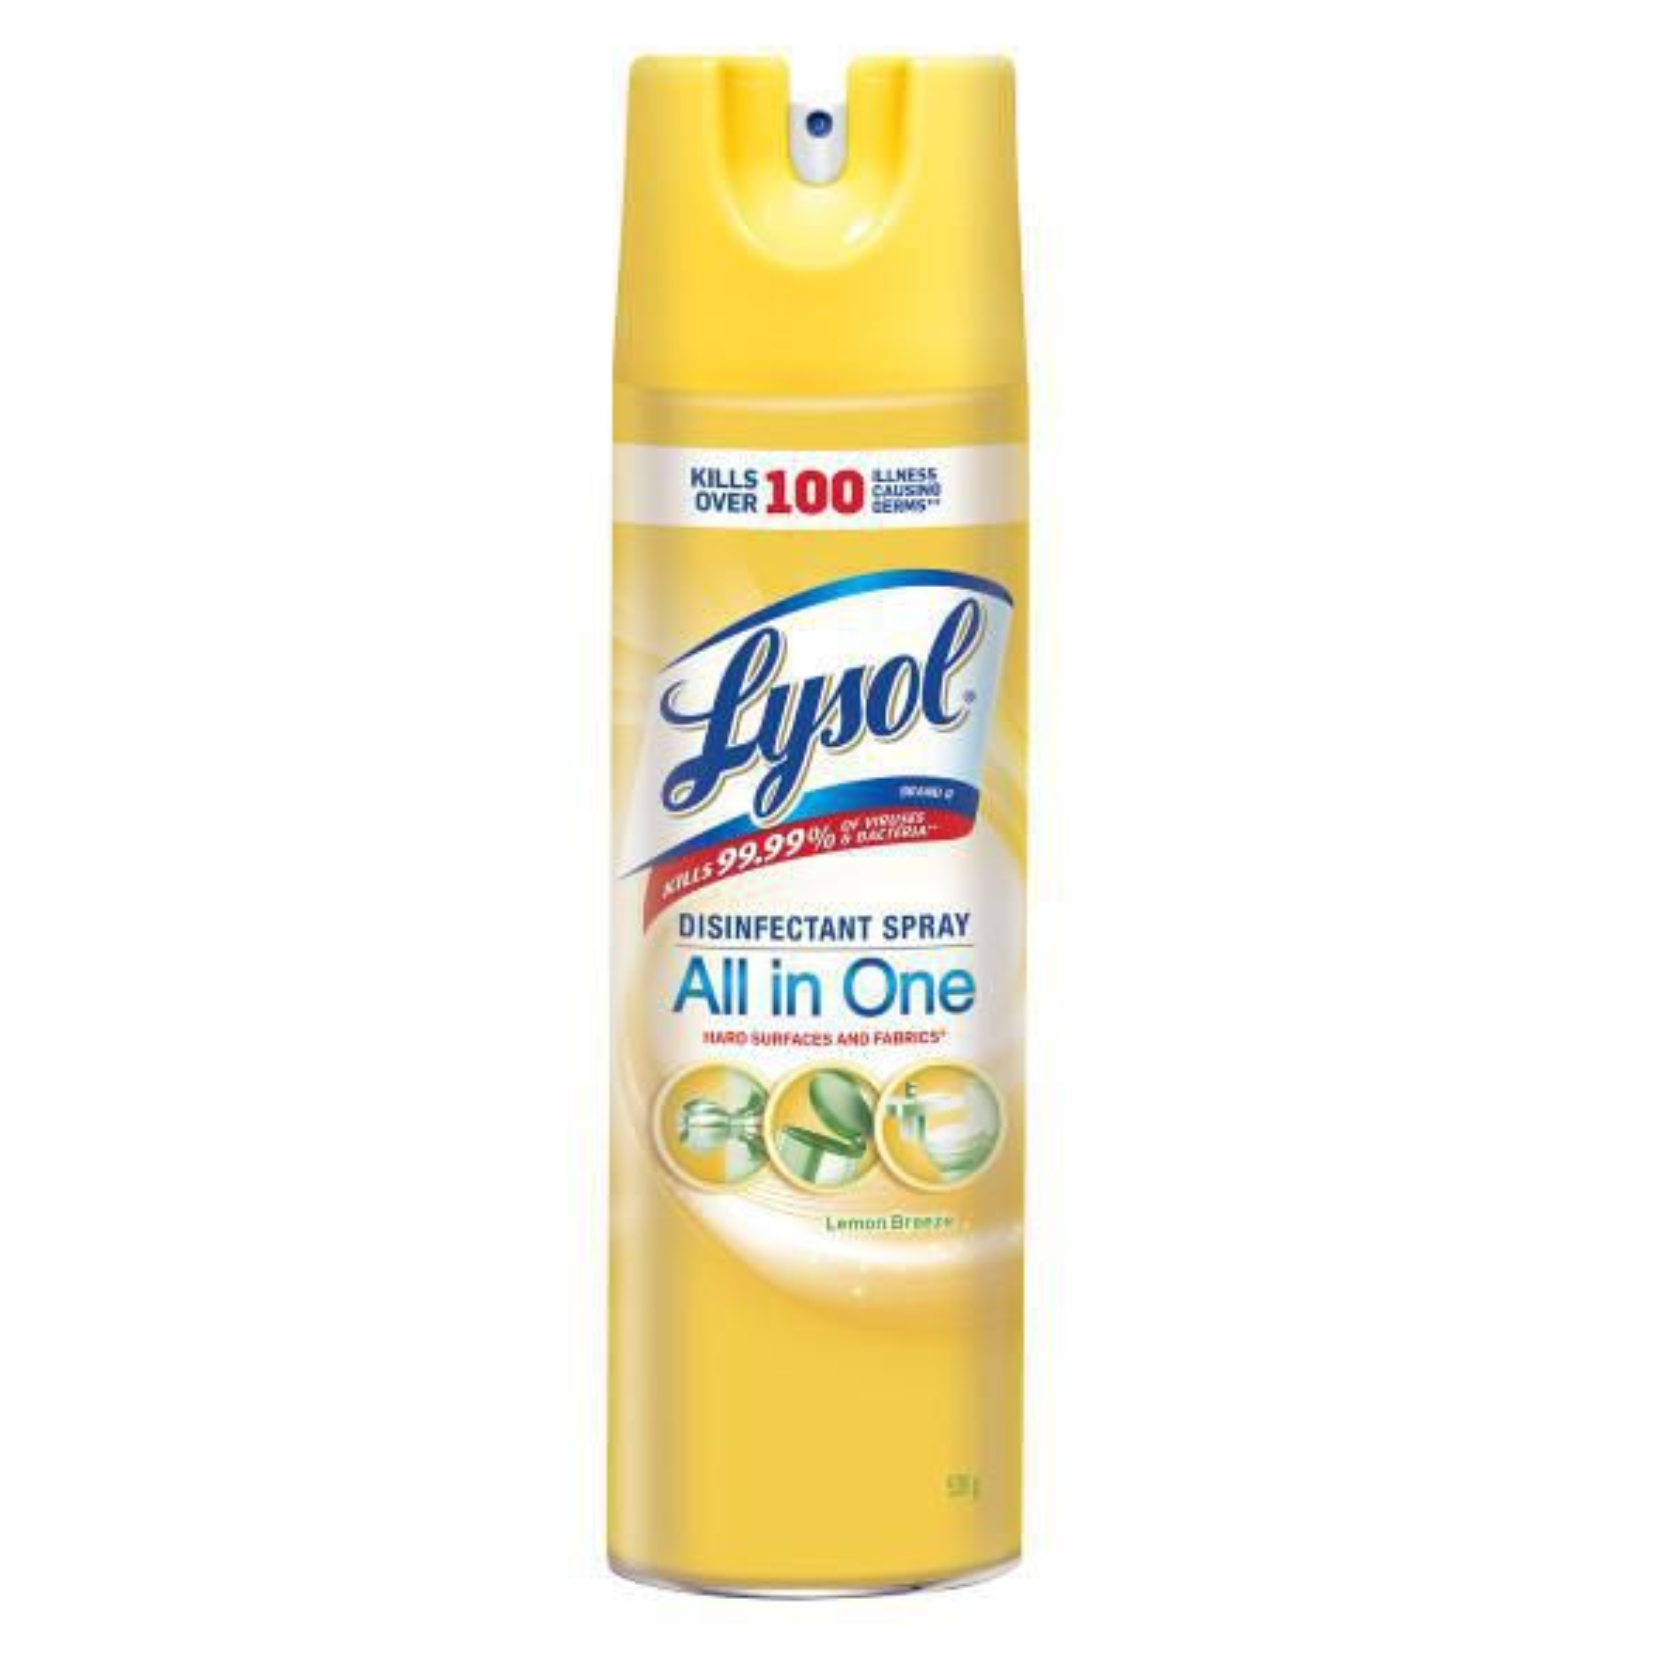 Lysol All In One Lemon Breeze Disinfectant Spray 539g